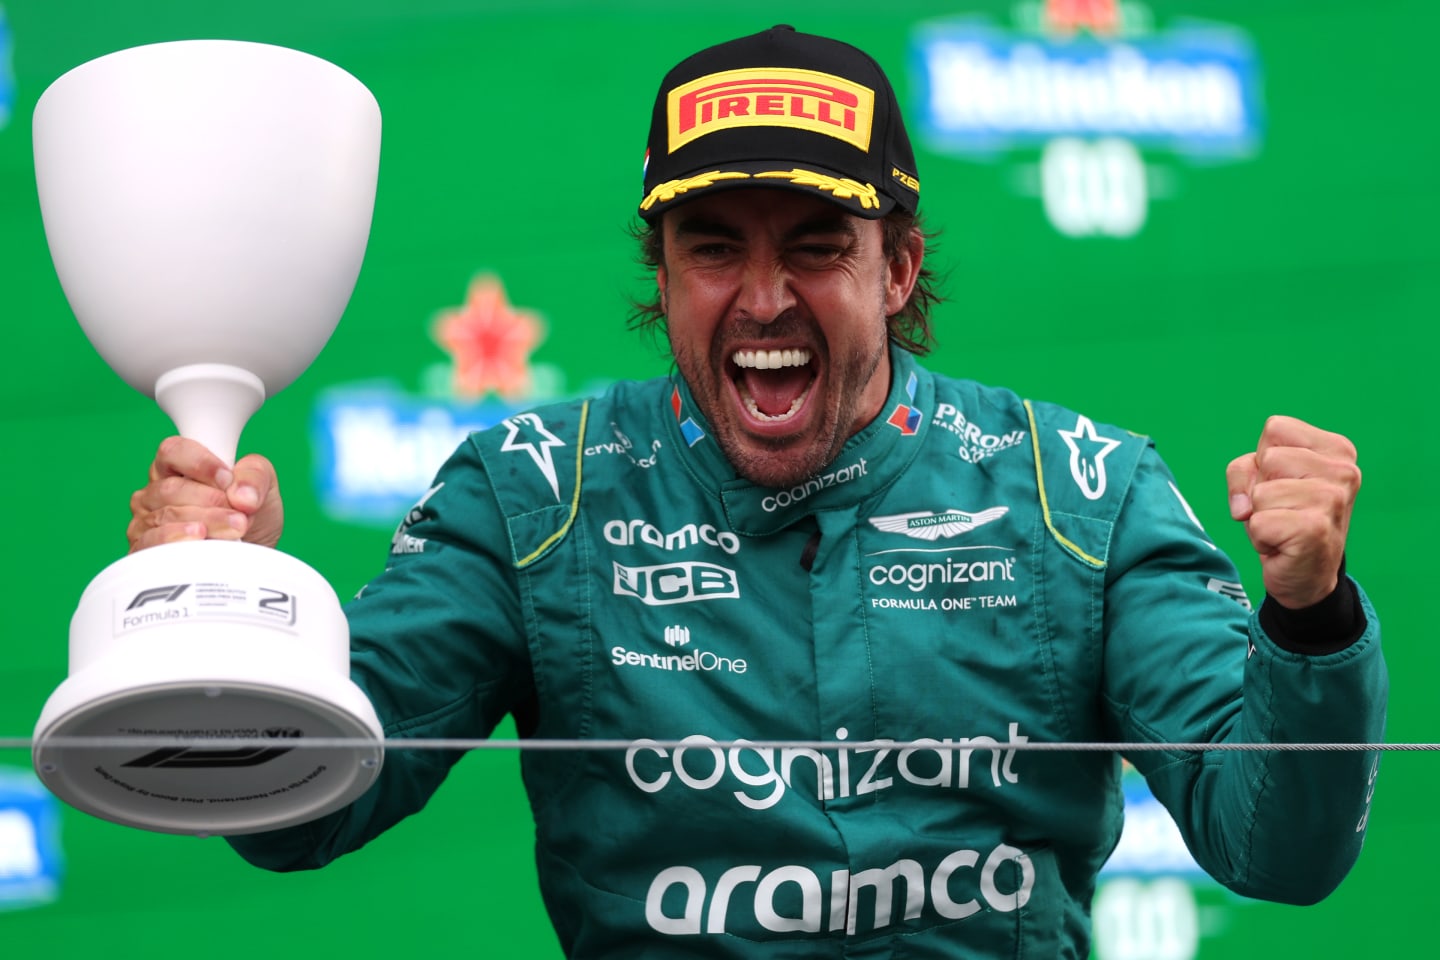 ZANDVOORT, NETHERLANDS - AUGUST 27: Second placed Fernando Alonso of Spain and Aston Martin F1 Team celebrates on the podium during the F1 Grand Prix of The Netherlands at Circuit Zandvoort on August 27, 2023 in Zandvoort, Netherlands. (Photo by Dean Mouhtaropoulos/Getty Images)